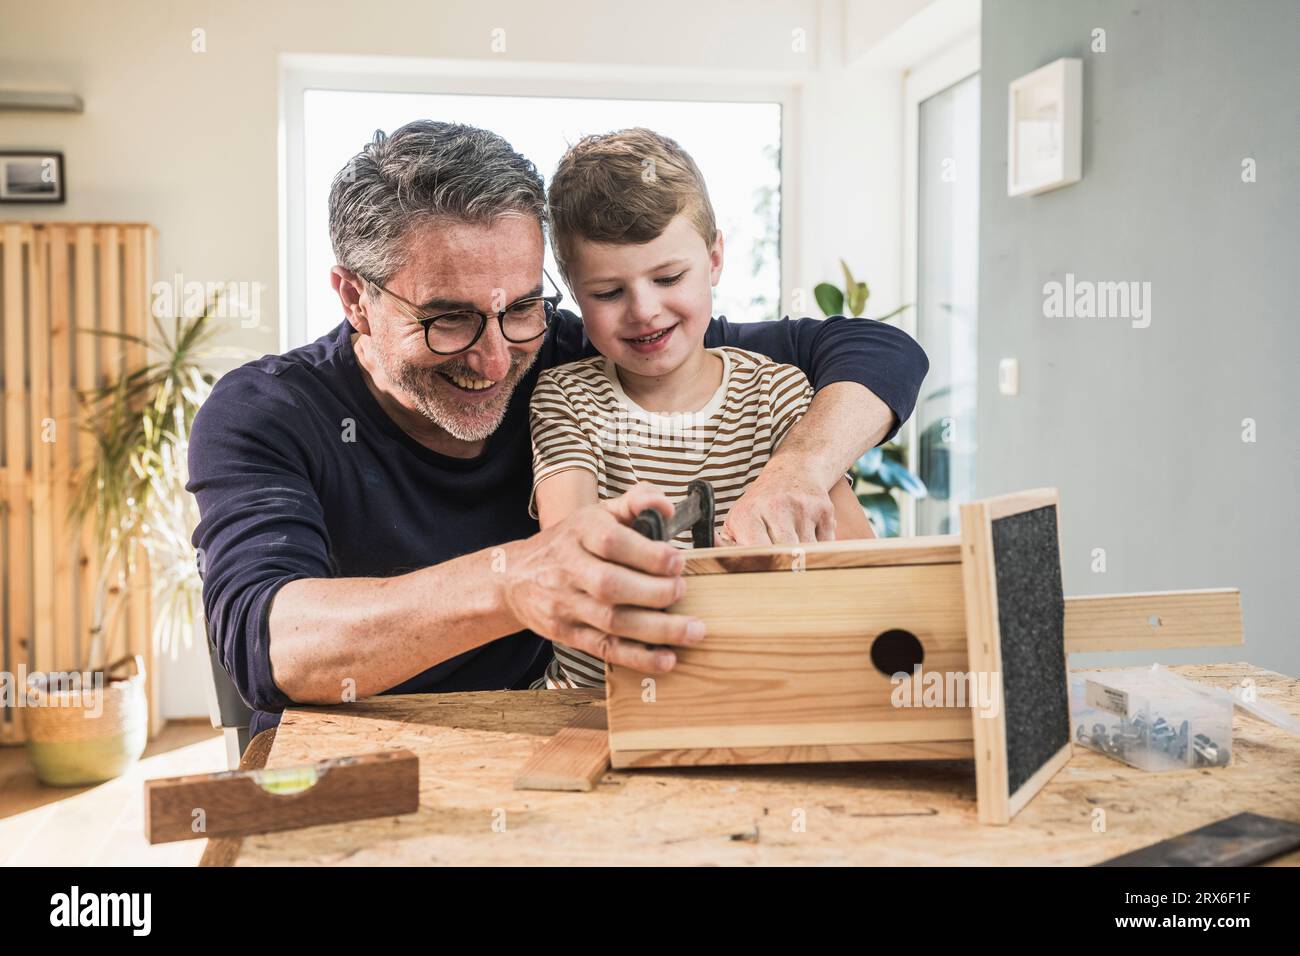 Smiling boy and man making wooden birdhouse at home Stock Photo